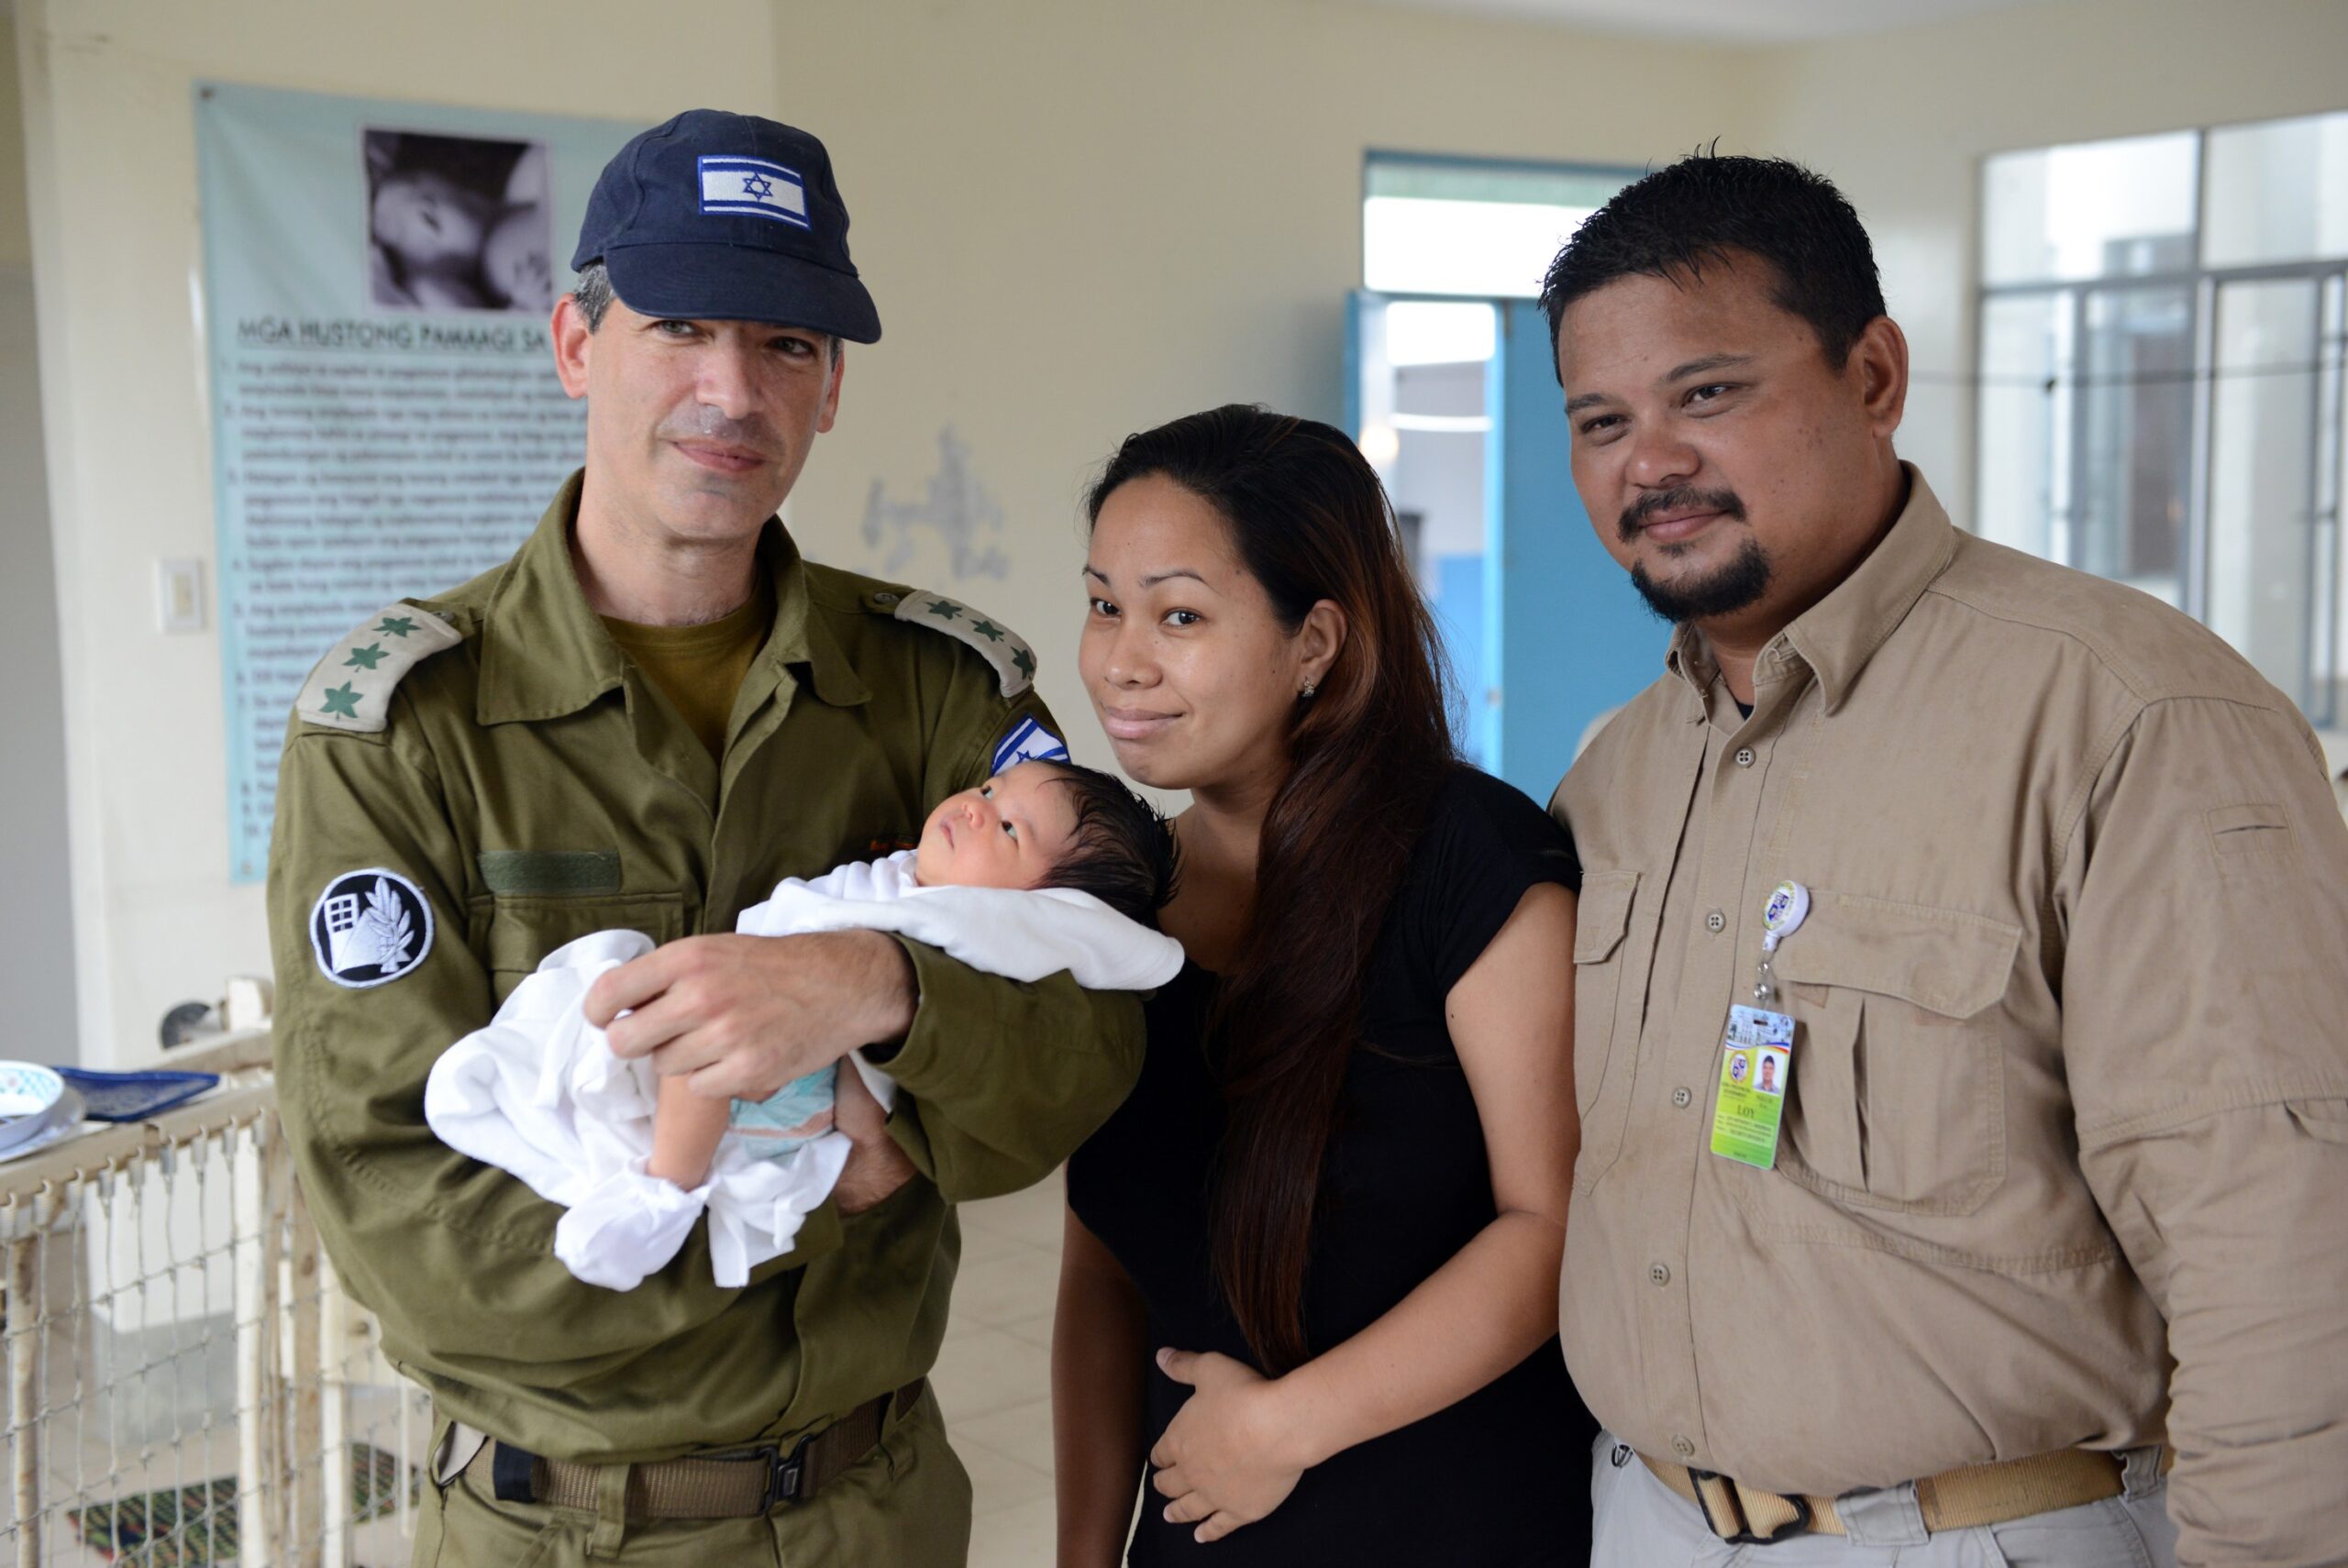 Louis, the head of security in Cebu, named his daughter Shai, after IDF Military AttachÃ© to the Philippines Col. Shai Brovender. (IDF Spokesperson's Unit)